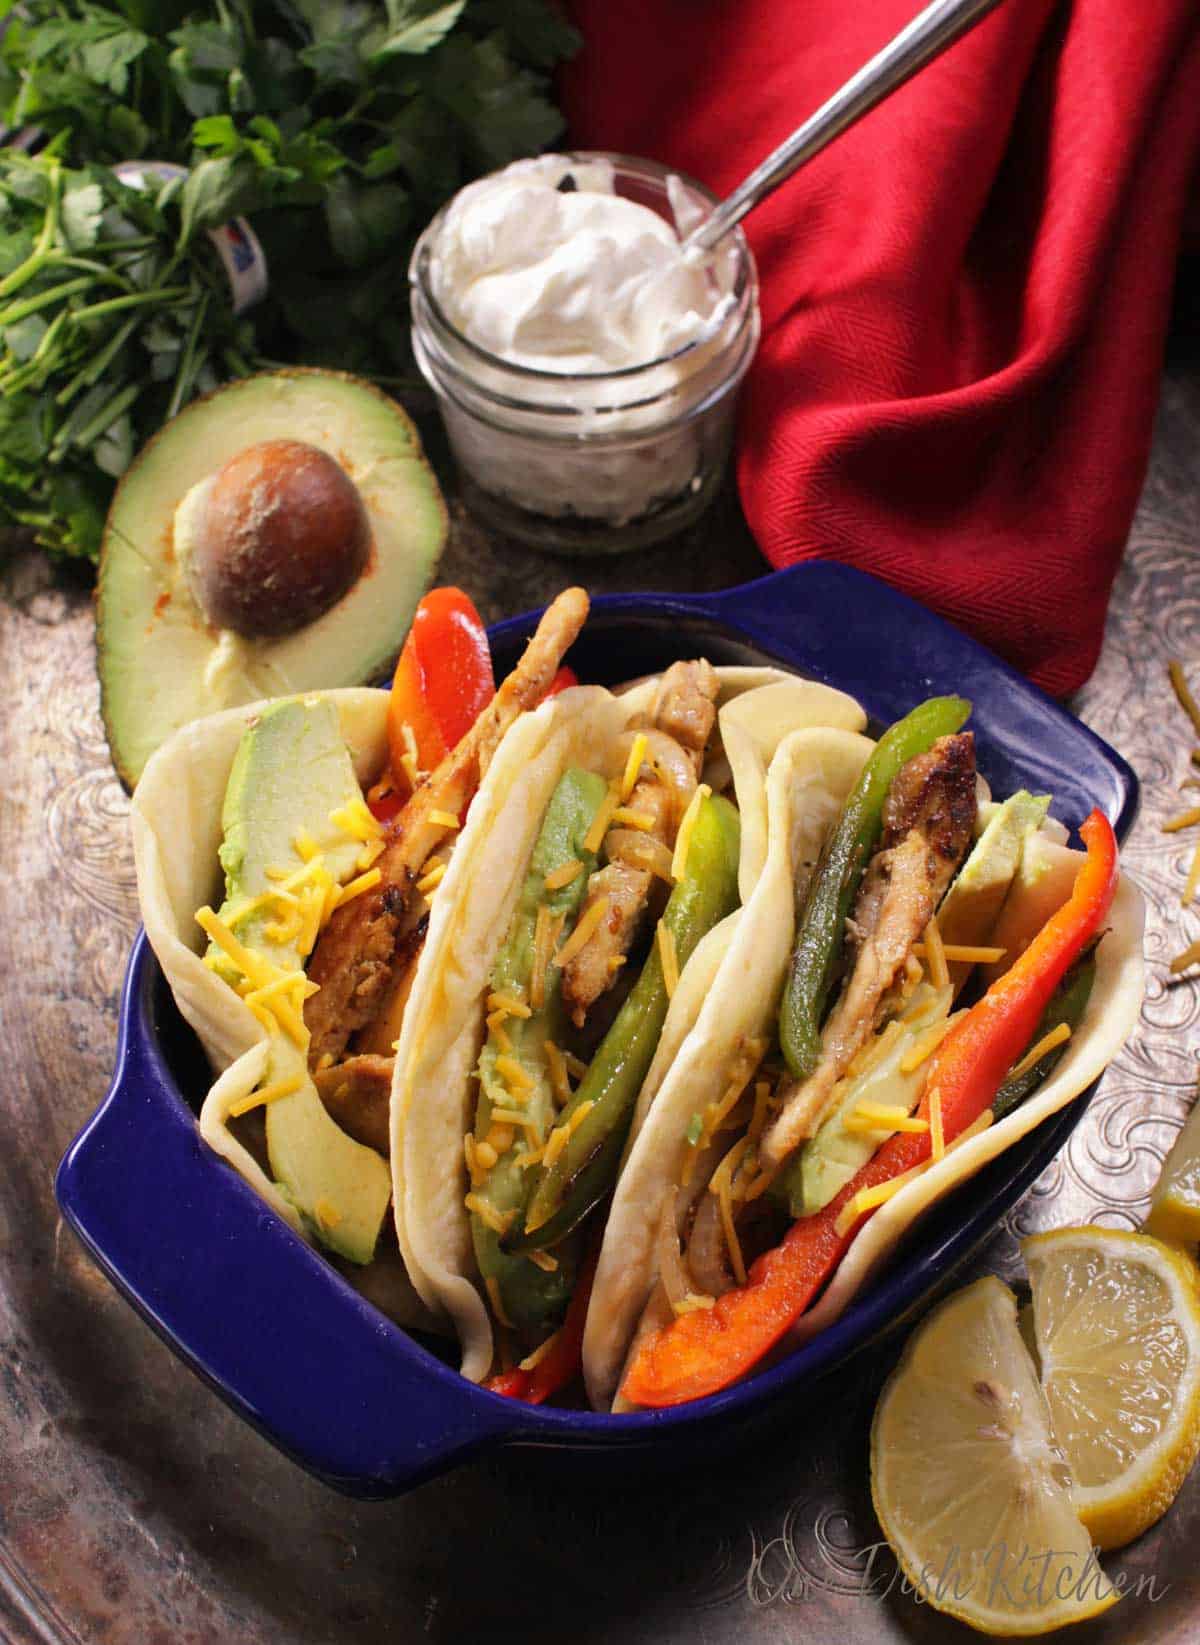 A small baking dish filled with three chicken fajitas filled with avocado slices, red and green bell peppers, and shredded cheese next to a half of an avocado and a small jar of sour cream.